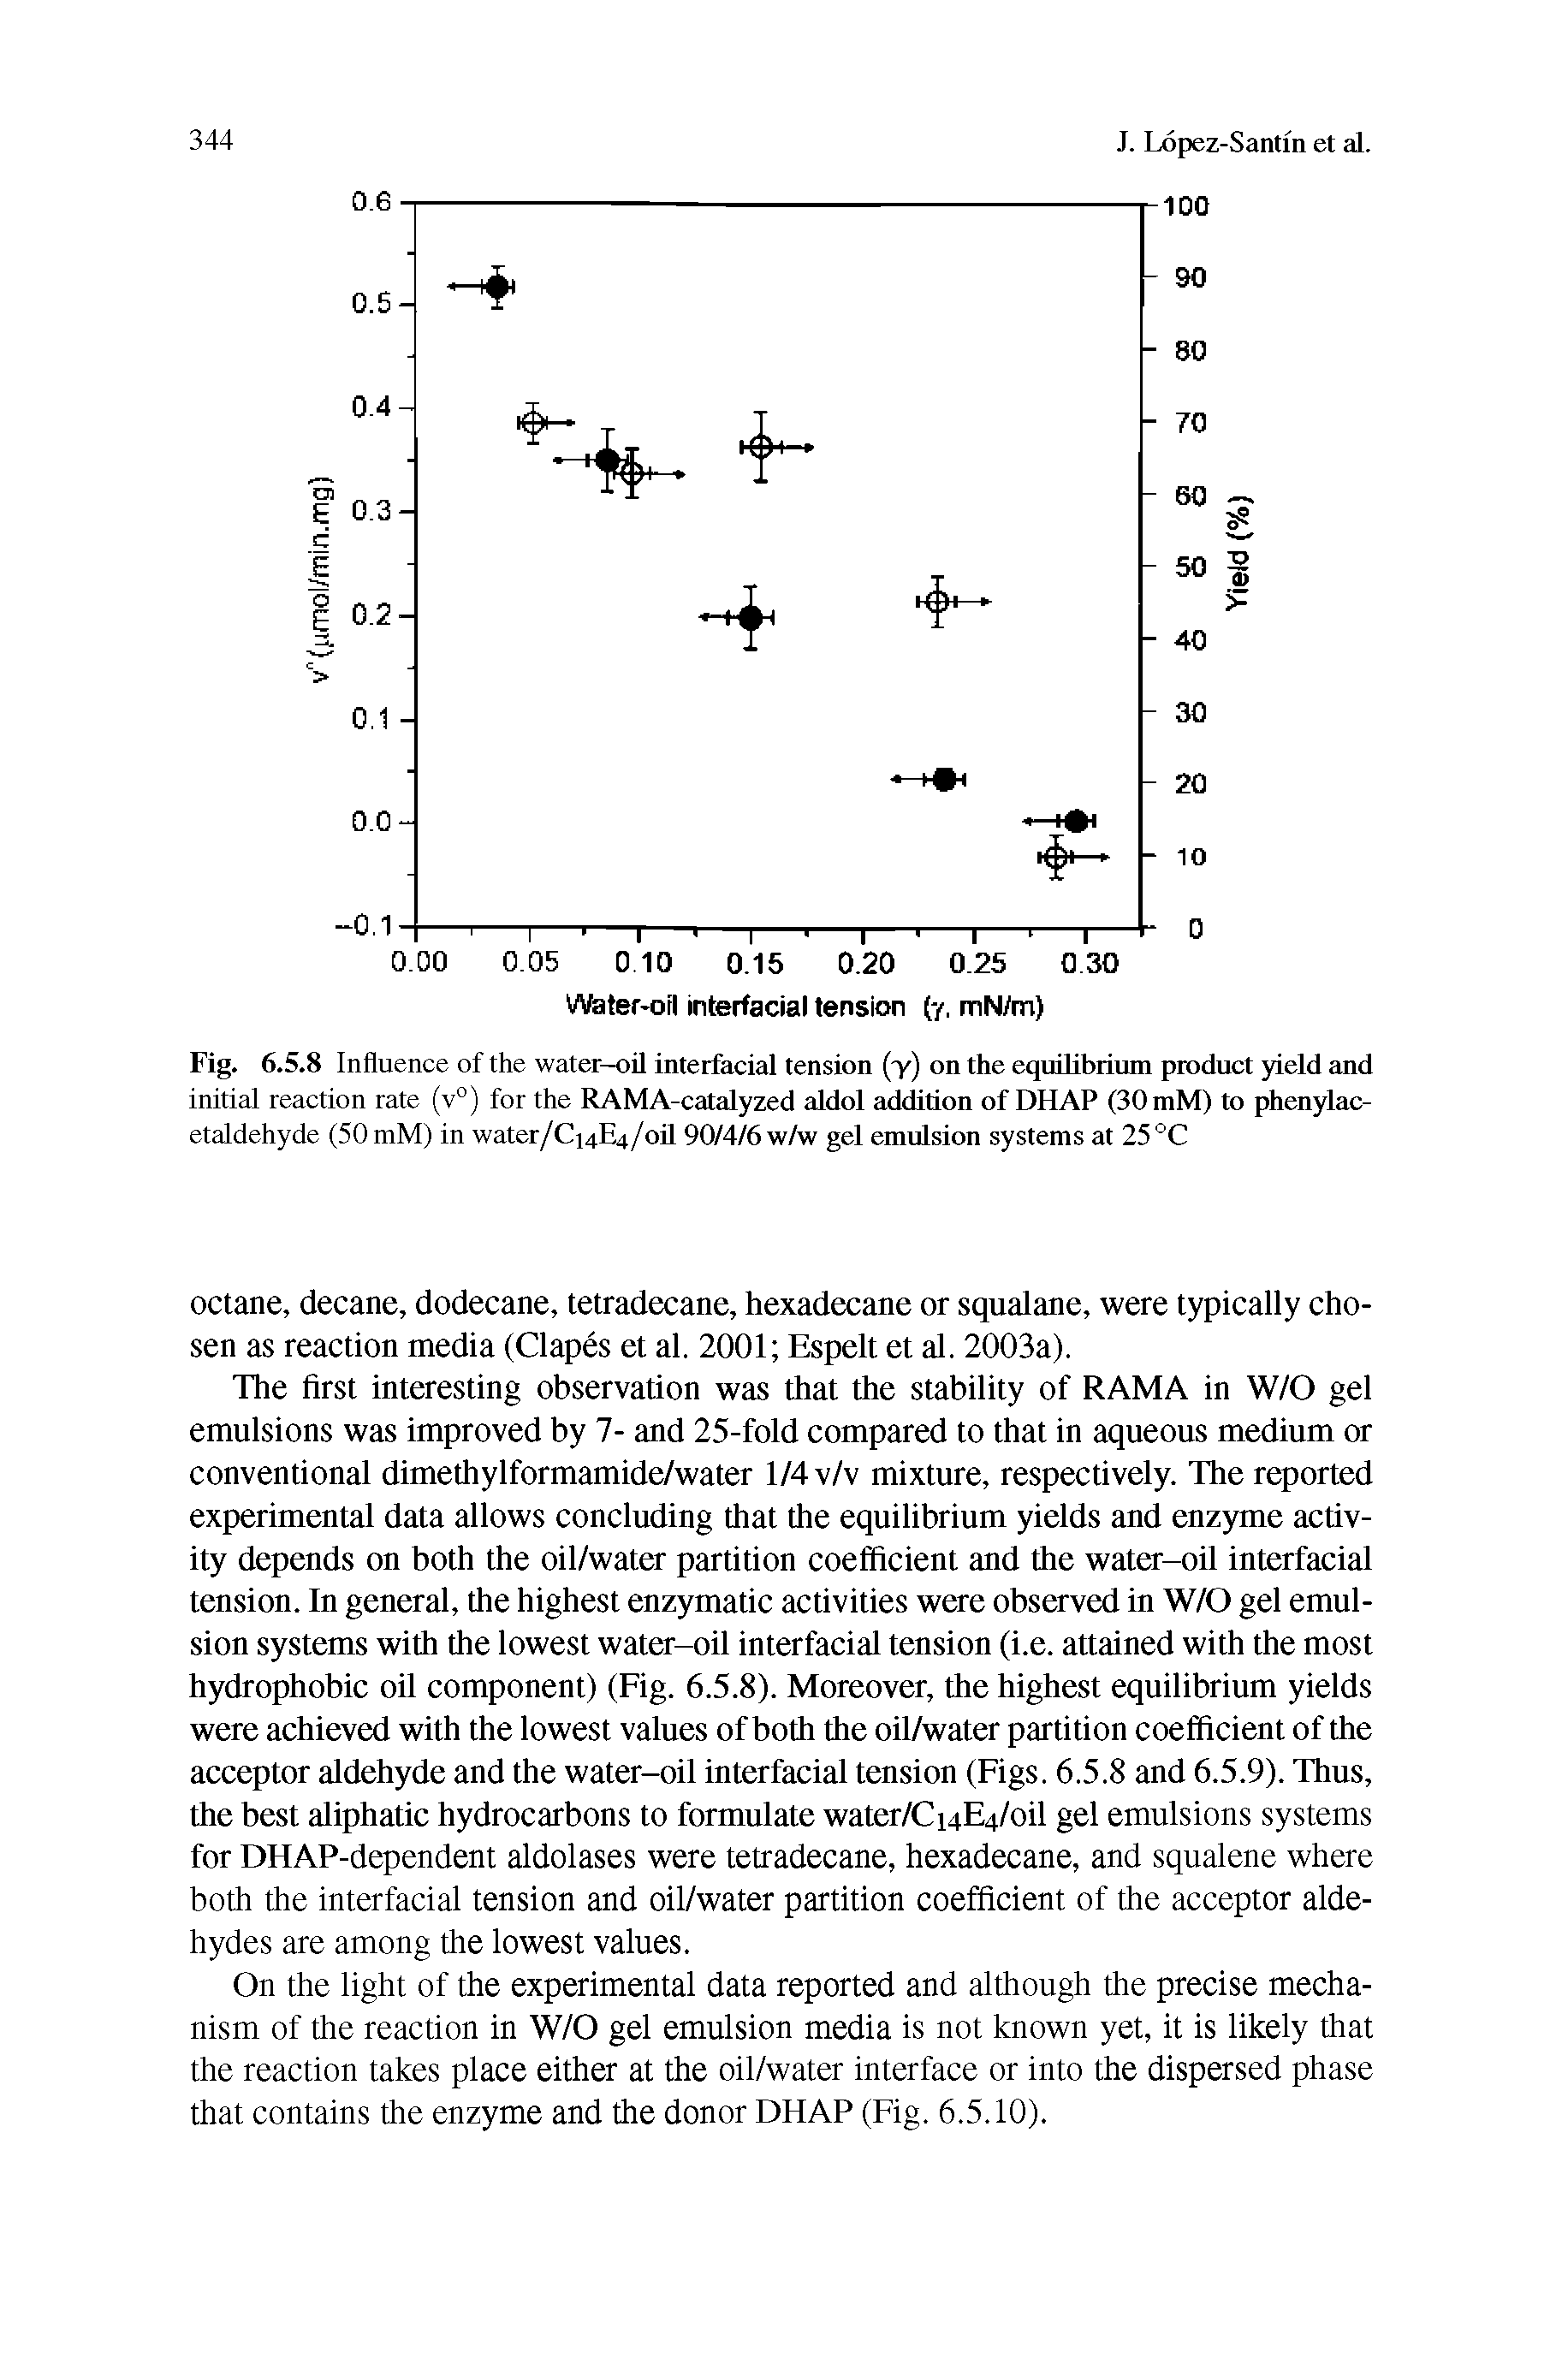 Fig. 6.5.8 Influence of the water-oil interfacial tension (-y) on the equilibrium product yield and initial reaction rate (v°) for the RAMA-catalyzed aldol addition of DHAP (30 mM) to phenylac-etaldehyde (50 mM) in water/CiaEa/oU 90/4/6w/w gel emulsion systems at 25 °C...